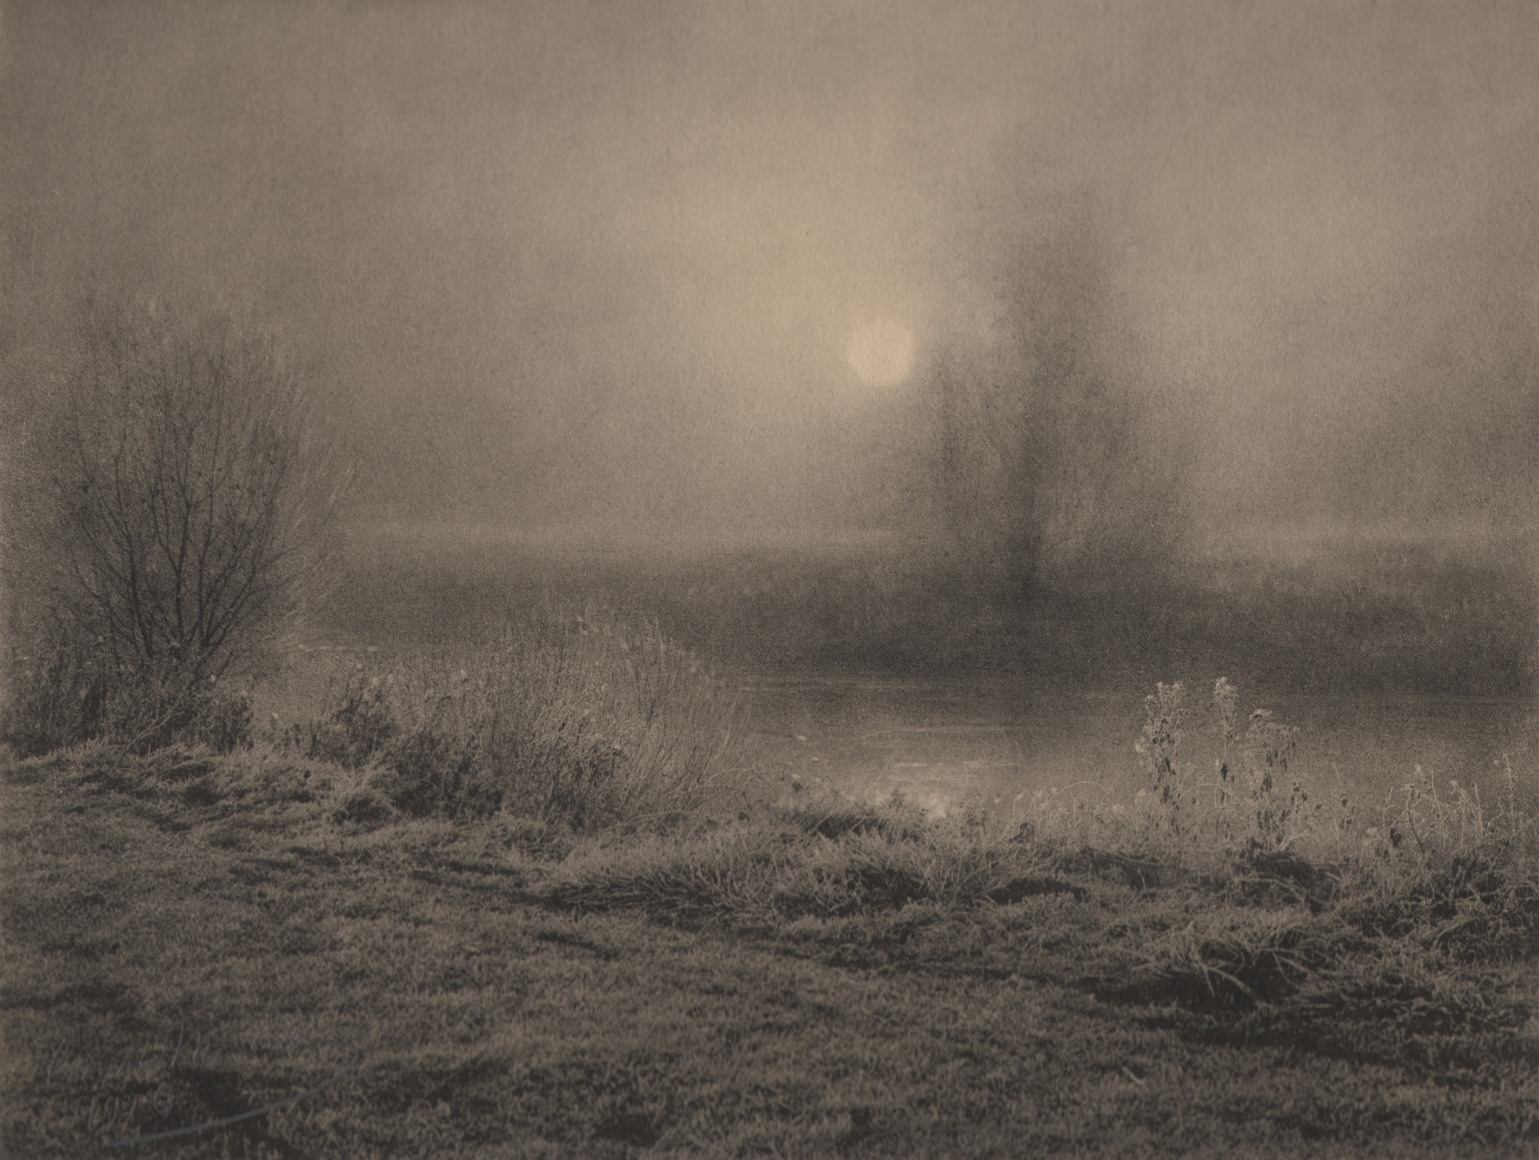 14. L&eacute;onard Misonne, Aurora a'hiver, 1926. Frosted brush and trees alongside a river in hazy sunlight. Sepia-toned print.